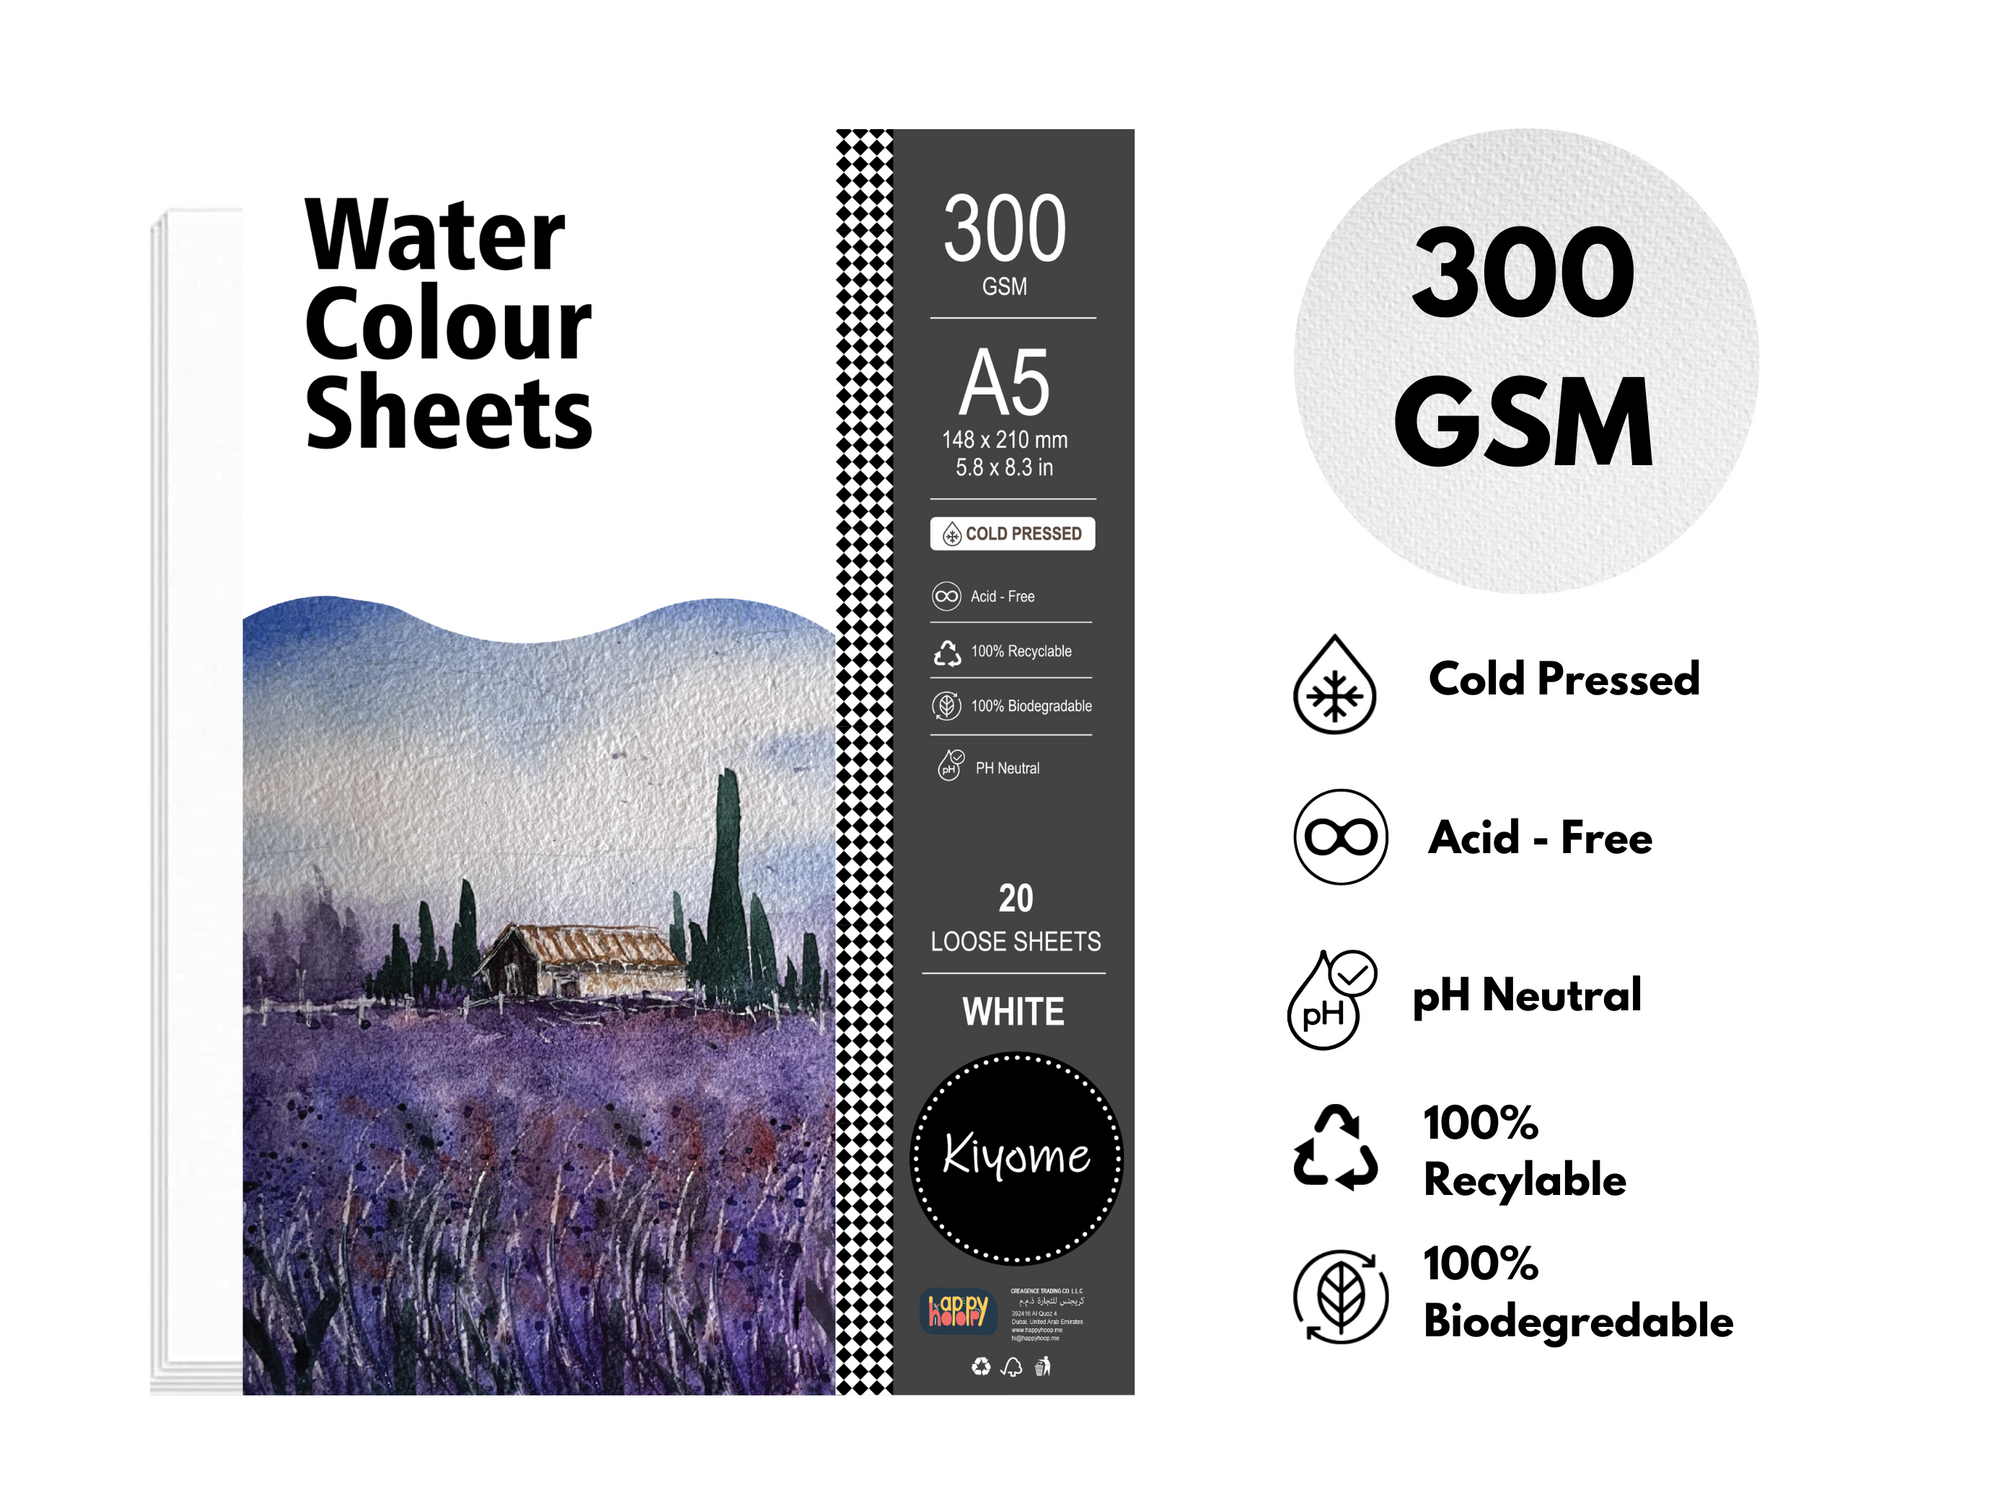 Kiyome Watercolour Sheets | Cold Pressed | 300 GSM | A5 | 20 Sheets